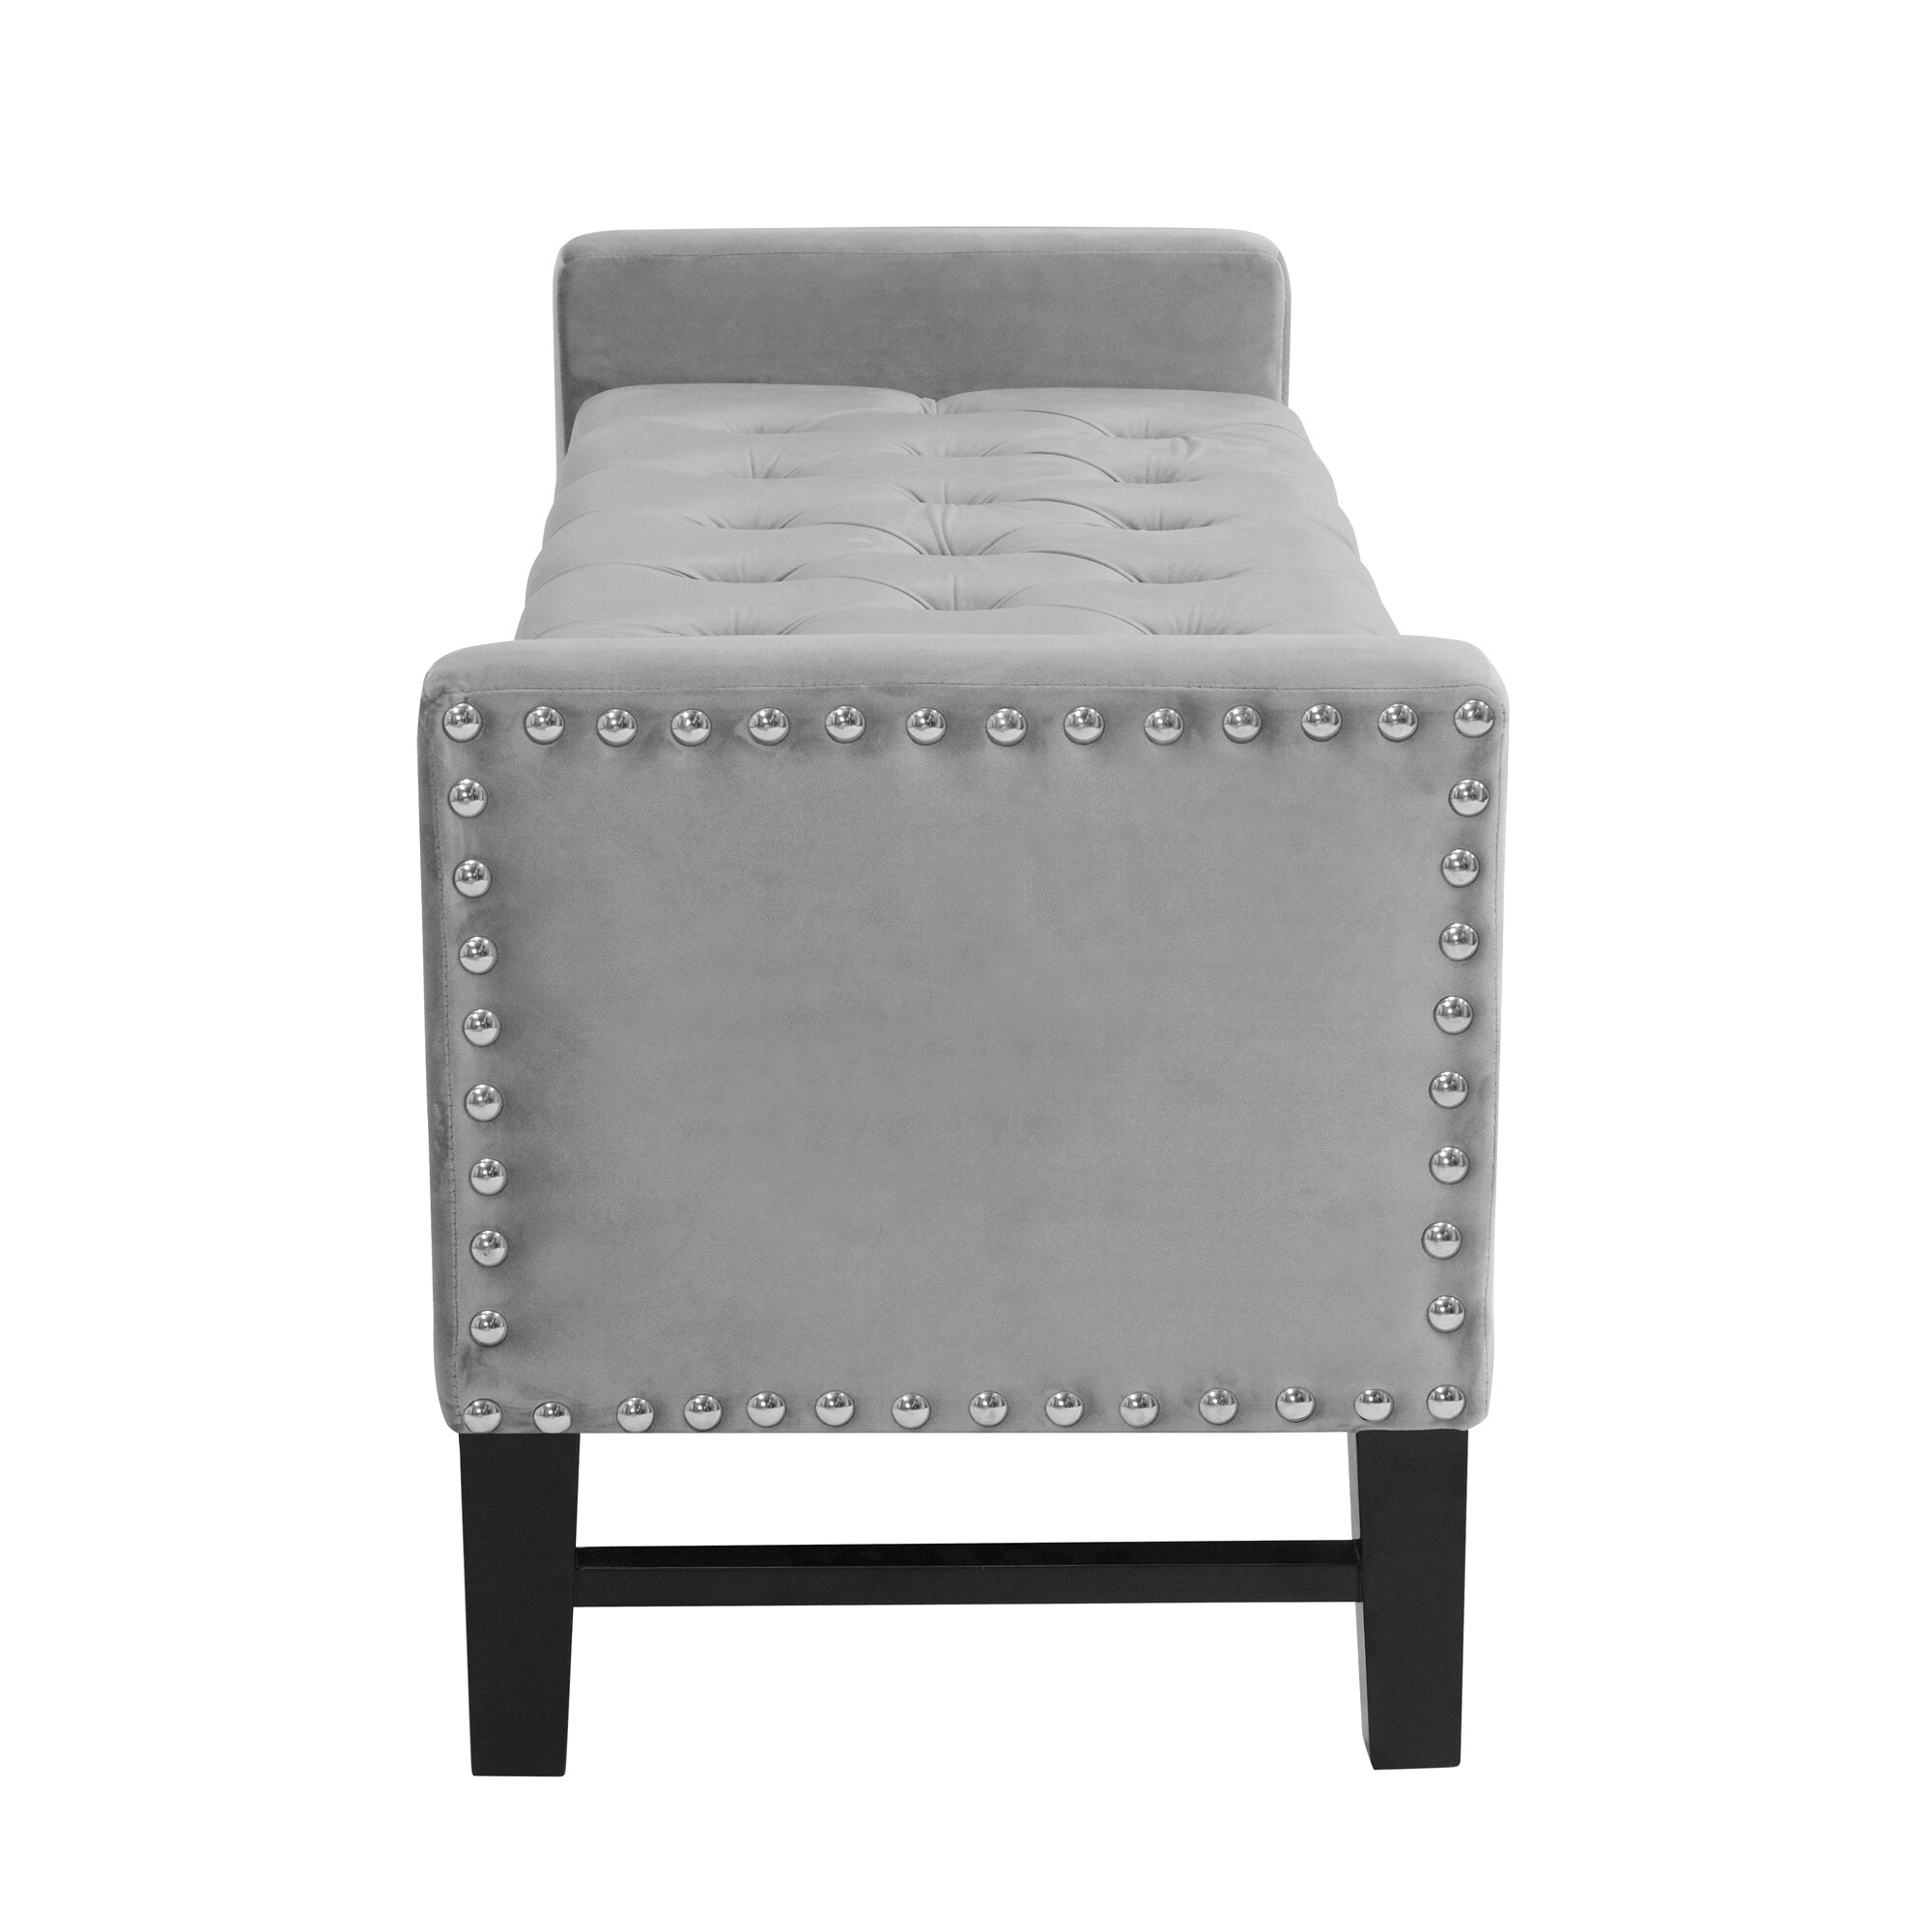 Inspired Home Emmaline Modern Light Benches department Bench 22.05-in the at in x Storage Grey Storage 50-in with